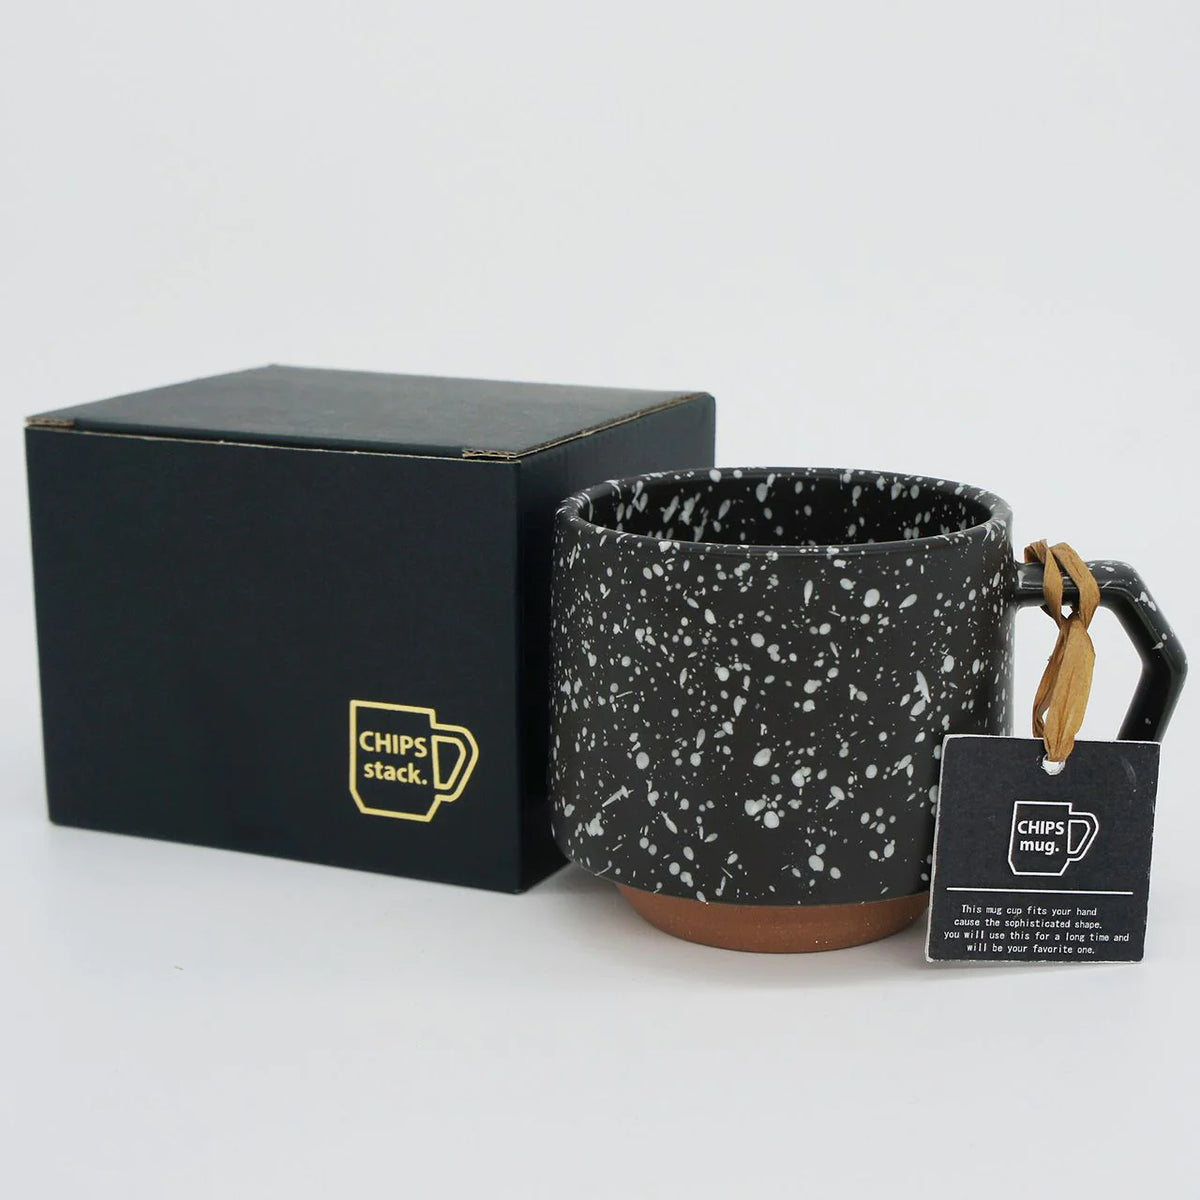 A Stacking Mug – Speckled Black made of porcelain, complete with a tag and packed in a black box by CHIPS Inc.